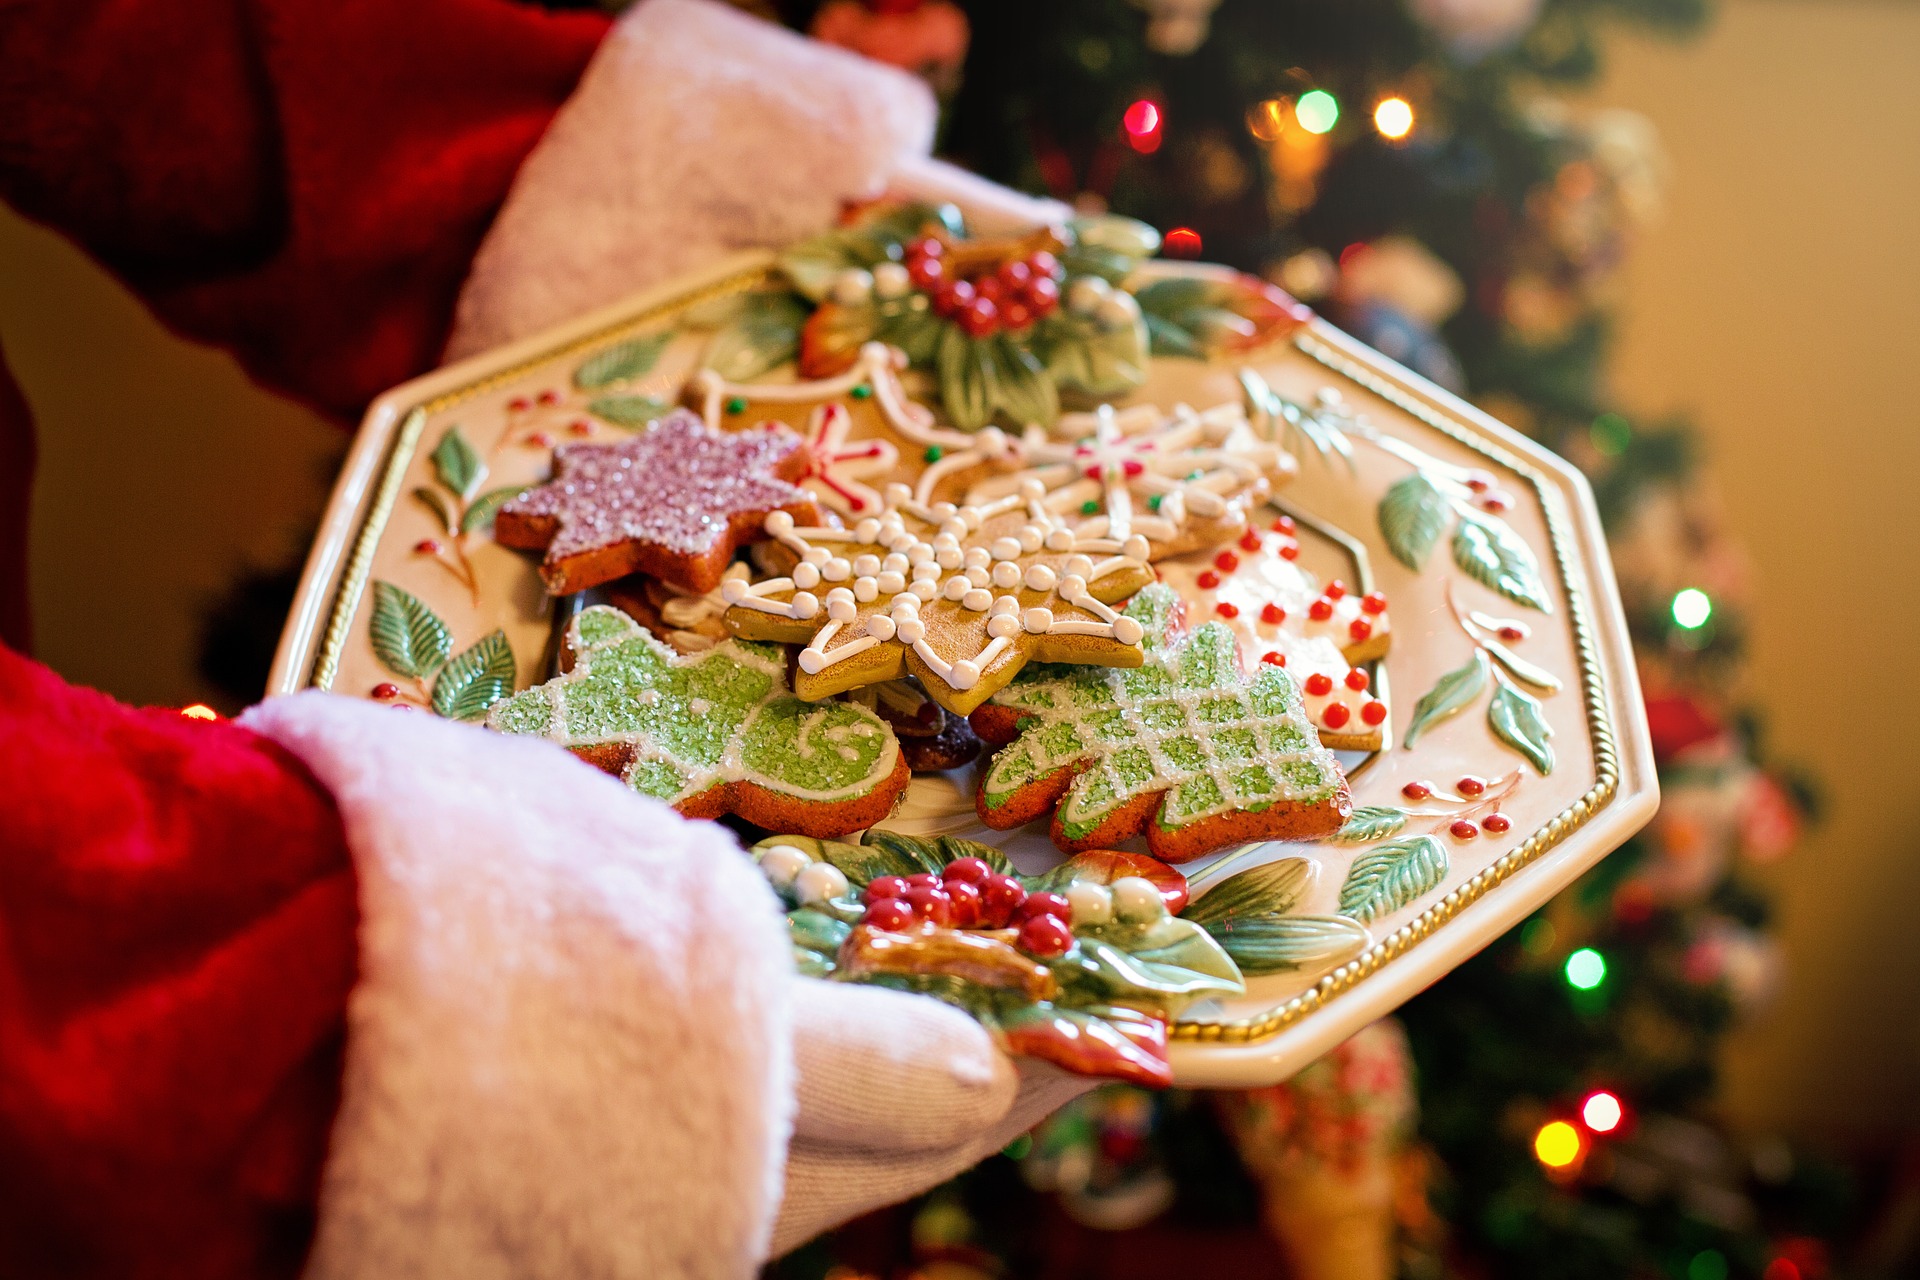 Santa holding a big plate of beautifully decorated Christmas cookiesis